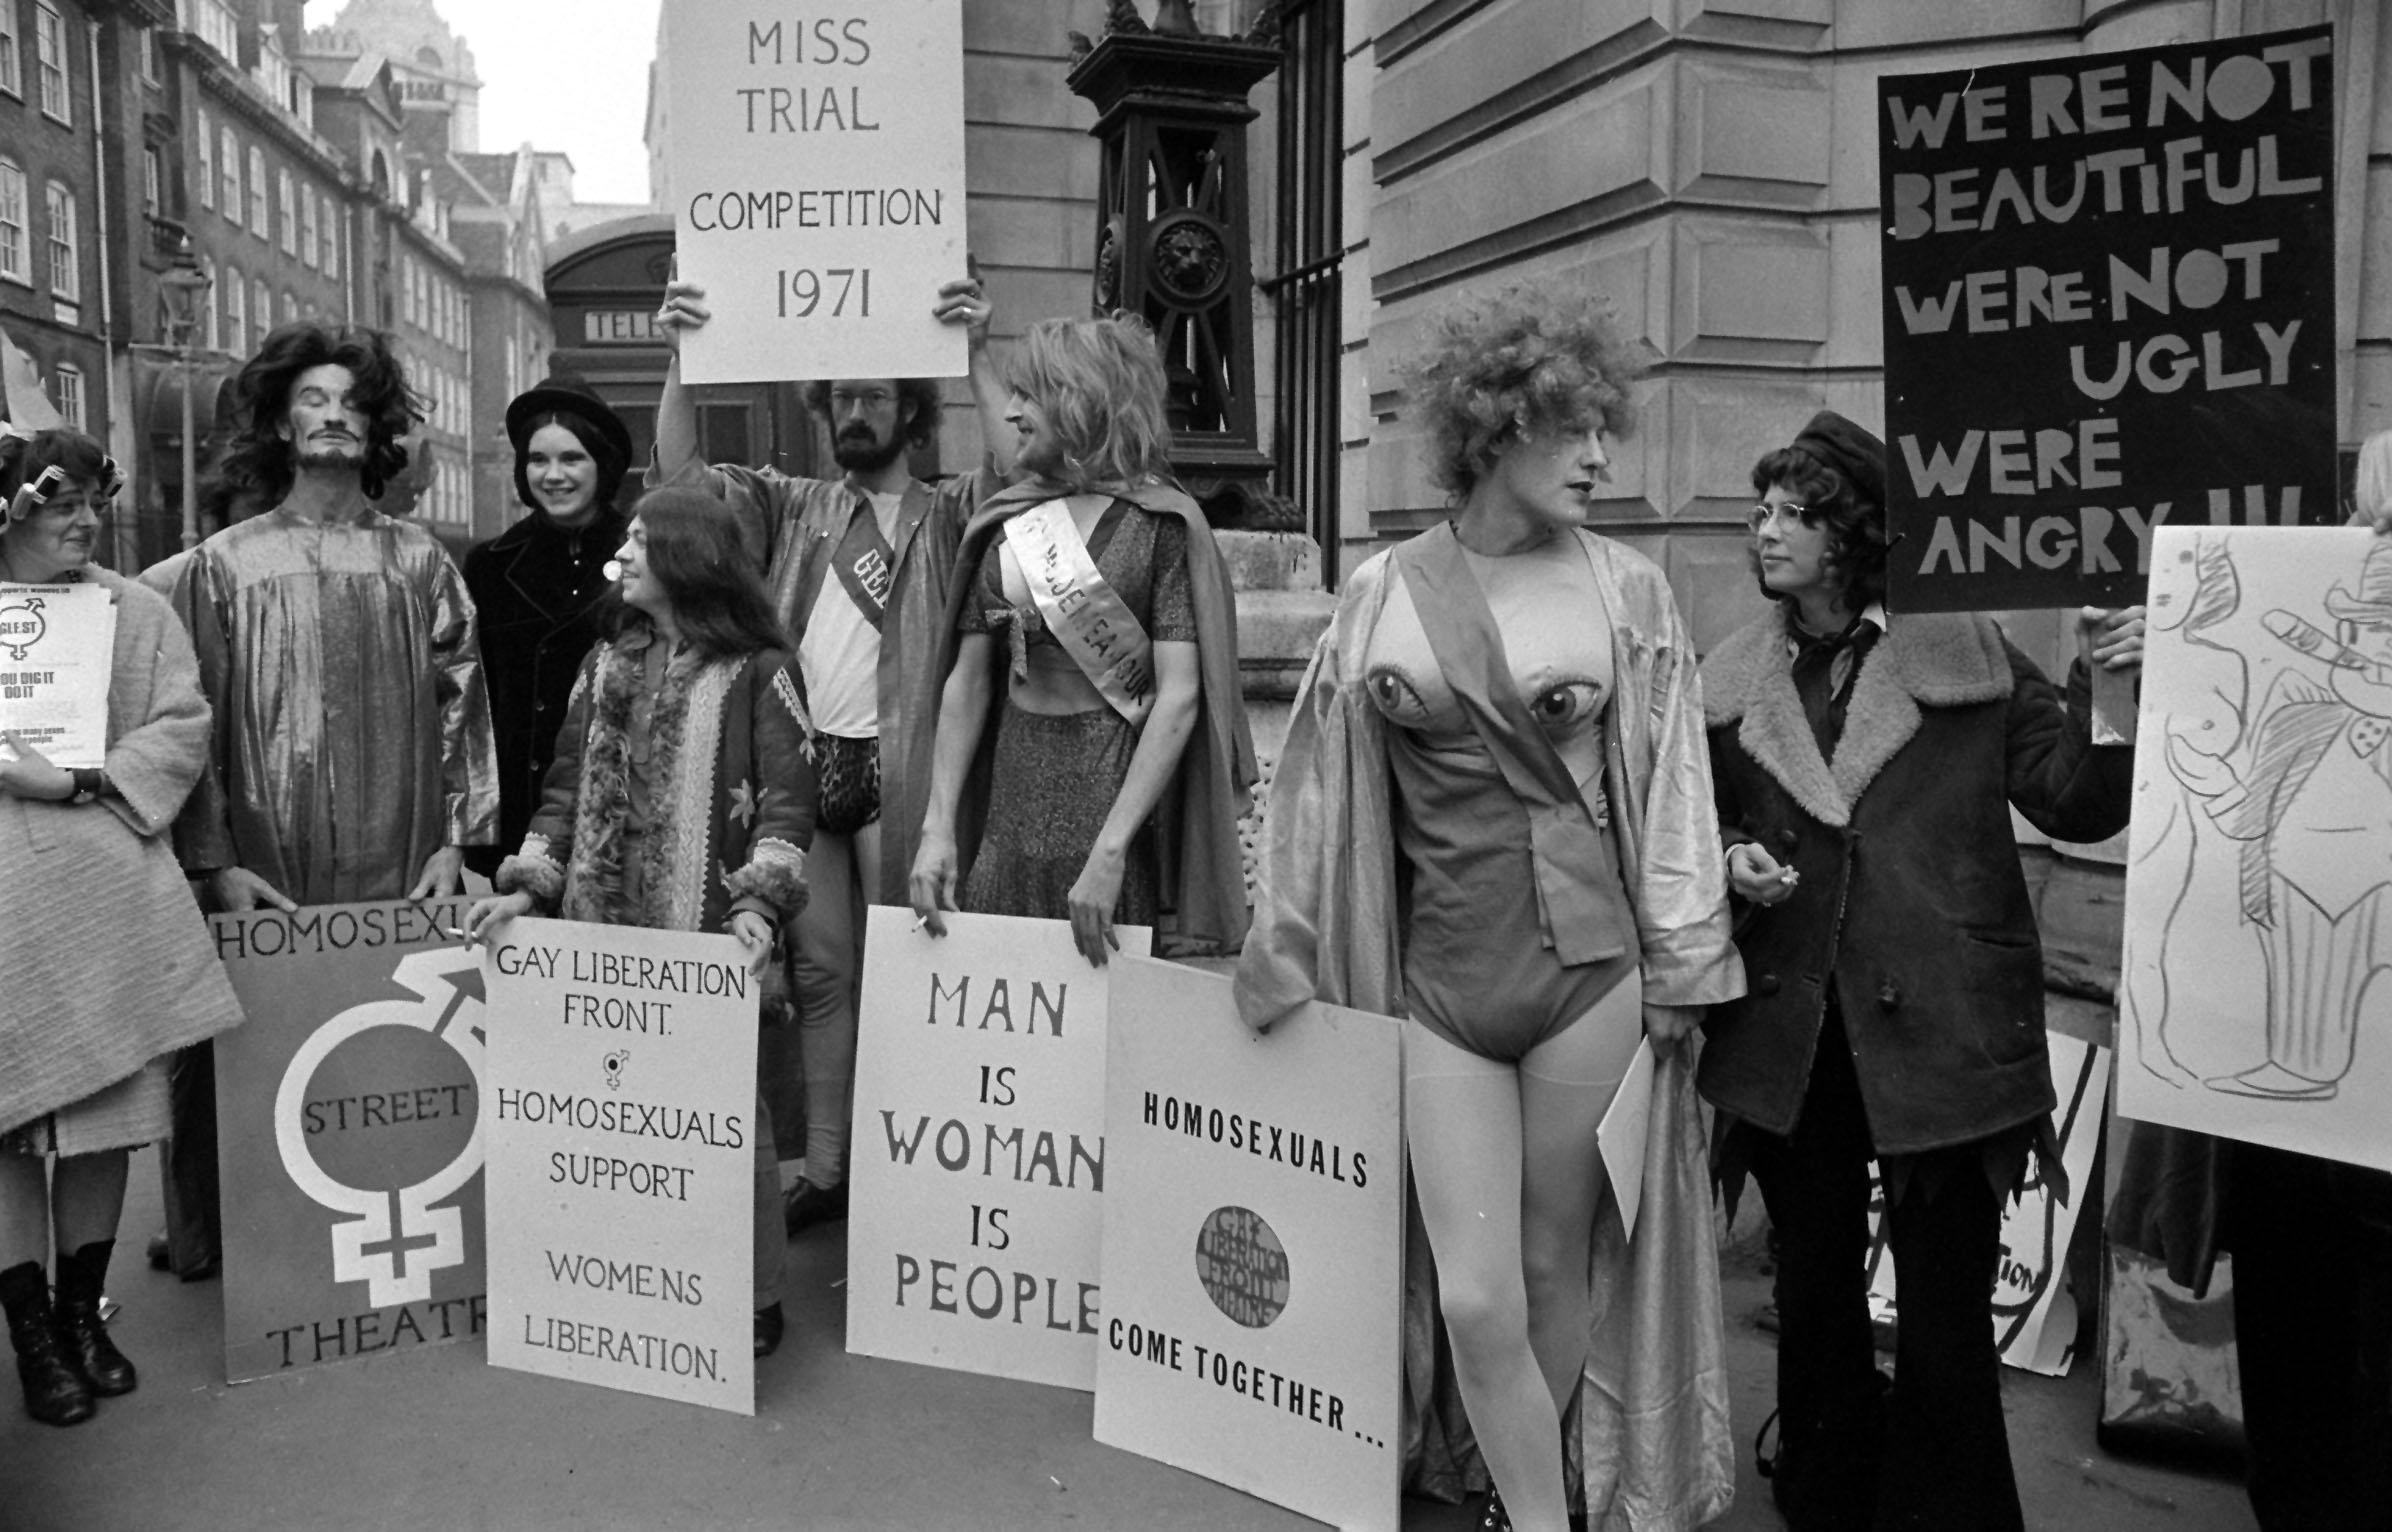 Members of the Gay Liberation Front demonstrating outside Bow Street Magistrates Court in 1971, supporting Womenâ€™s Liberation on trial for protesting Miss World Competition Â© PA Images / Alamy Stock Photo